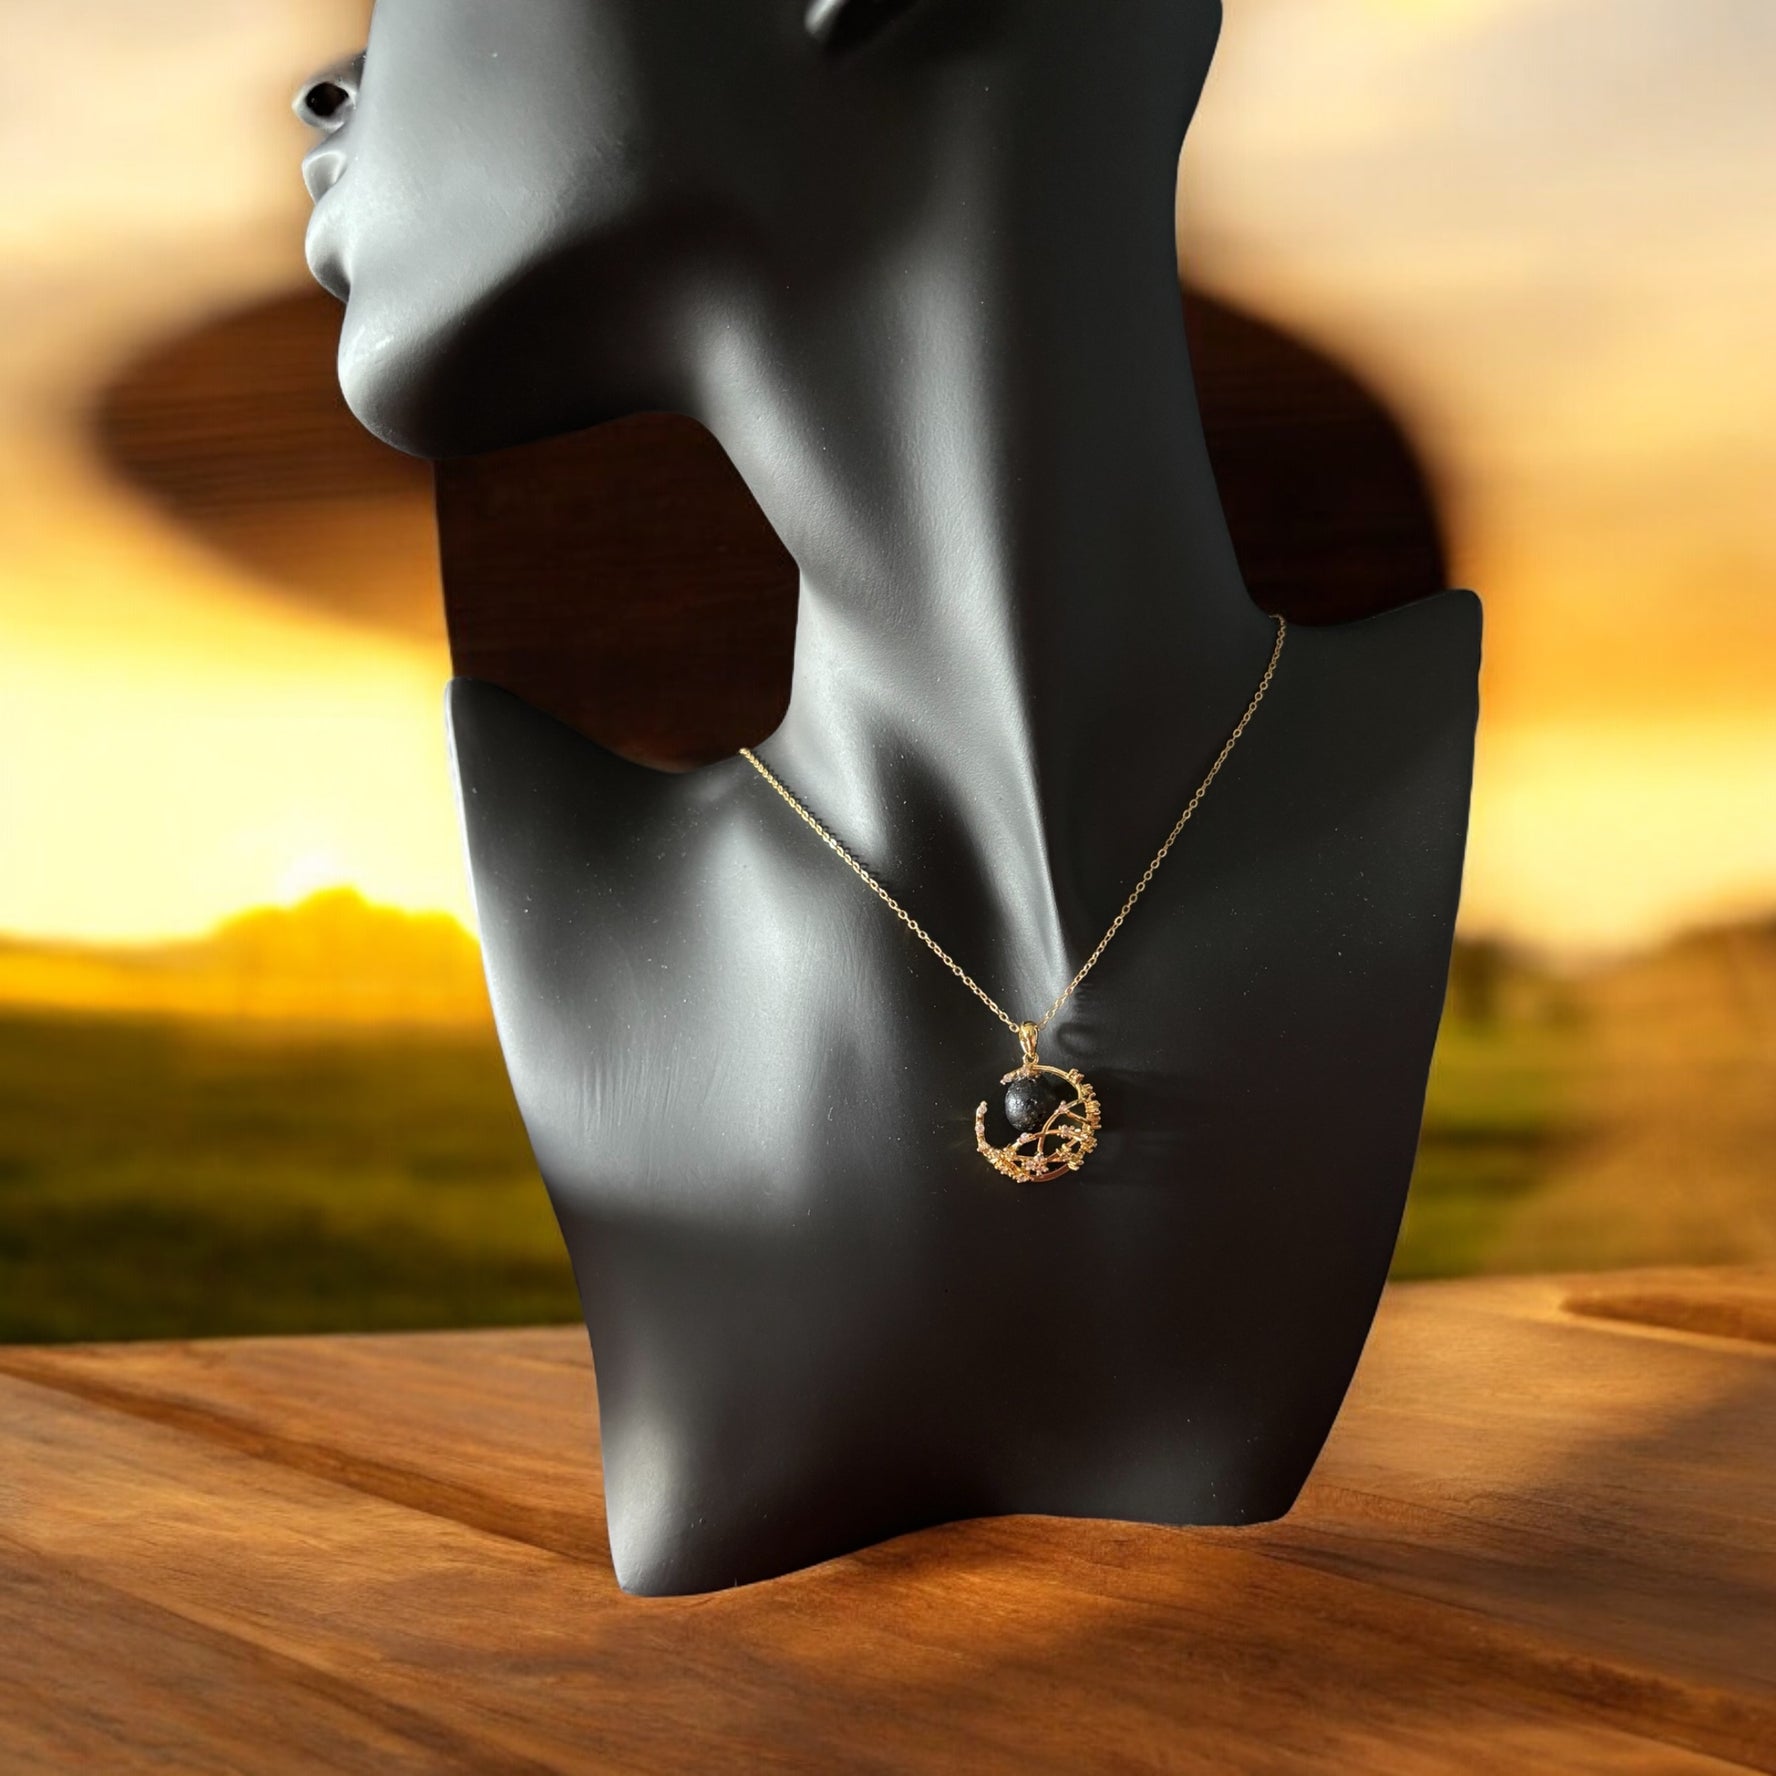 18K gold plated pendant with black lava stone bead